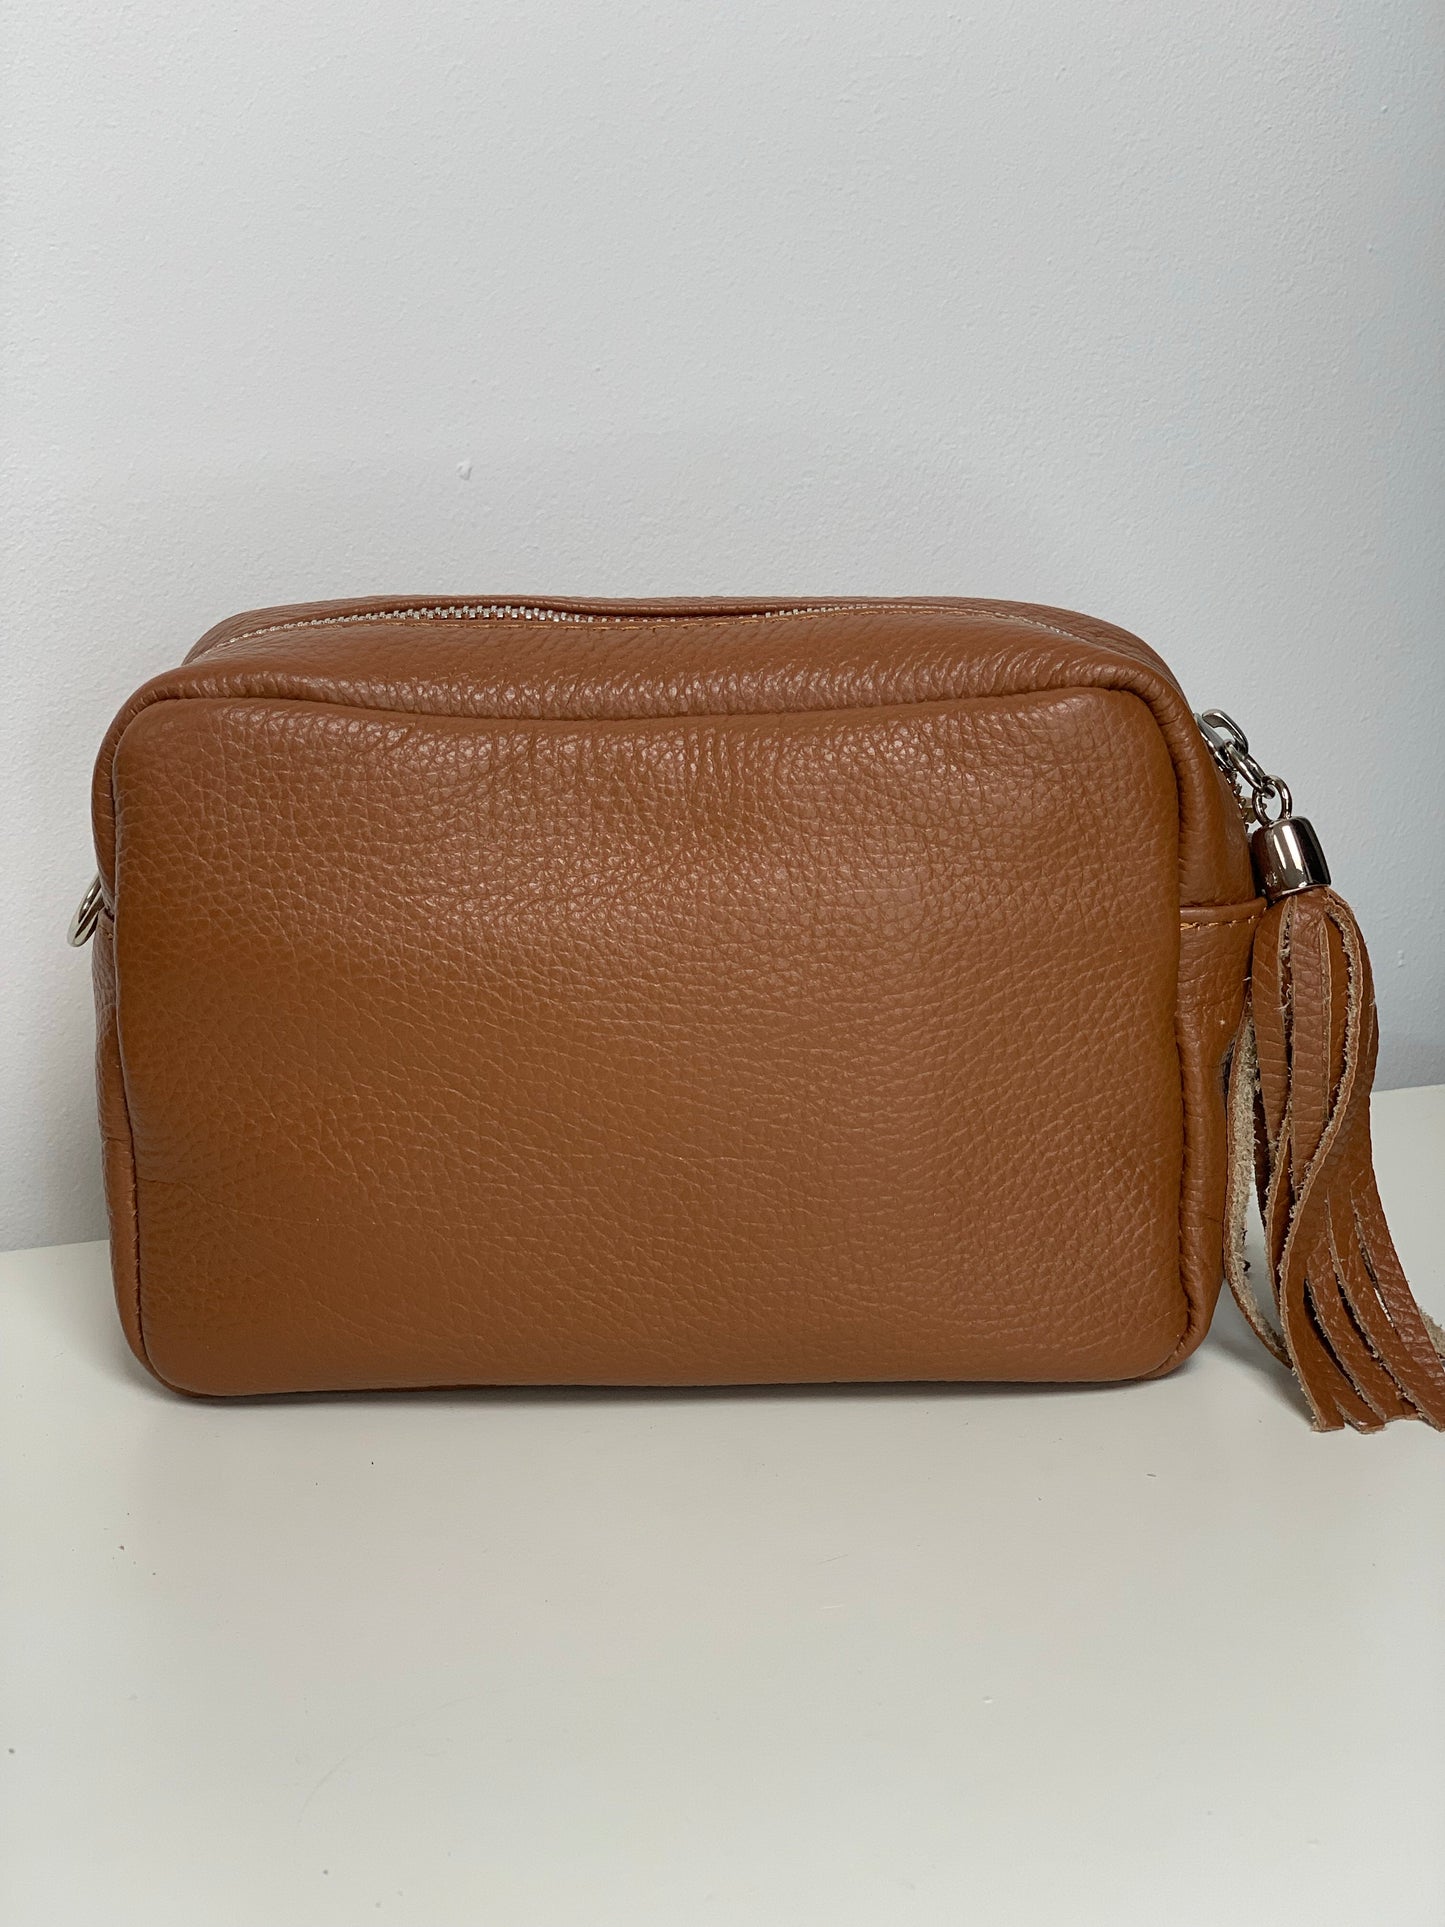 Brown Camera Bag - Real Leather